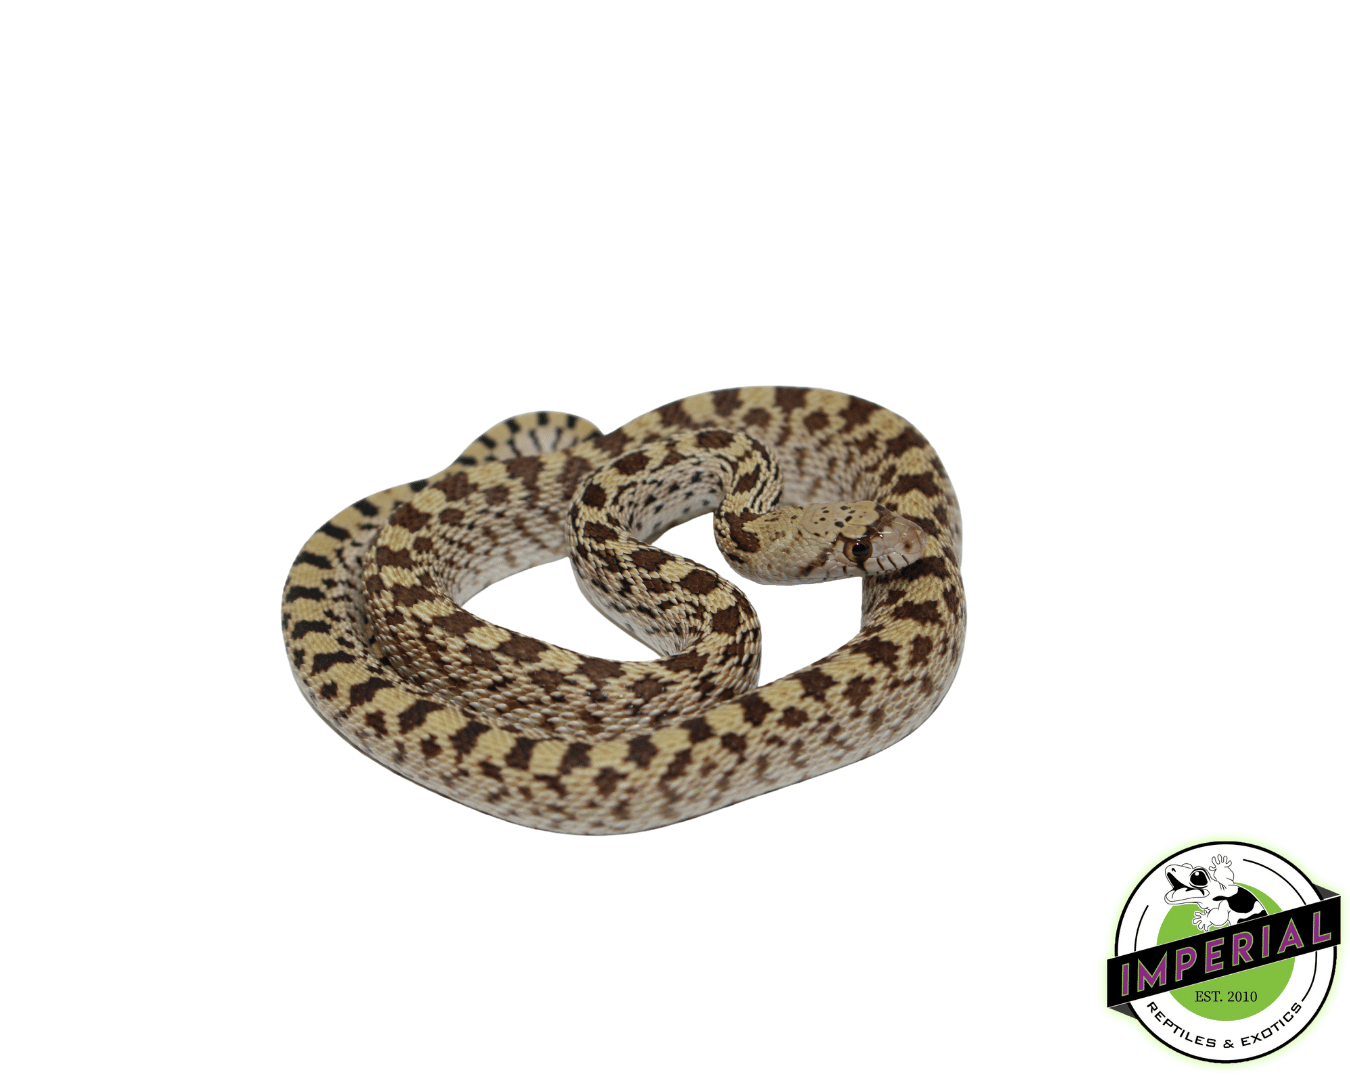 gopher snake for sale online, buy gopher snake near me at cheap prices